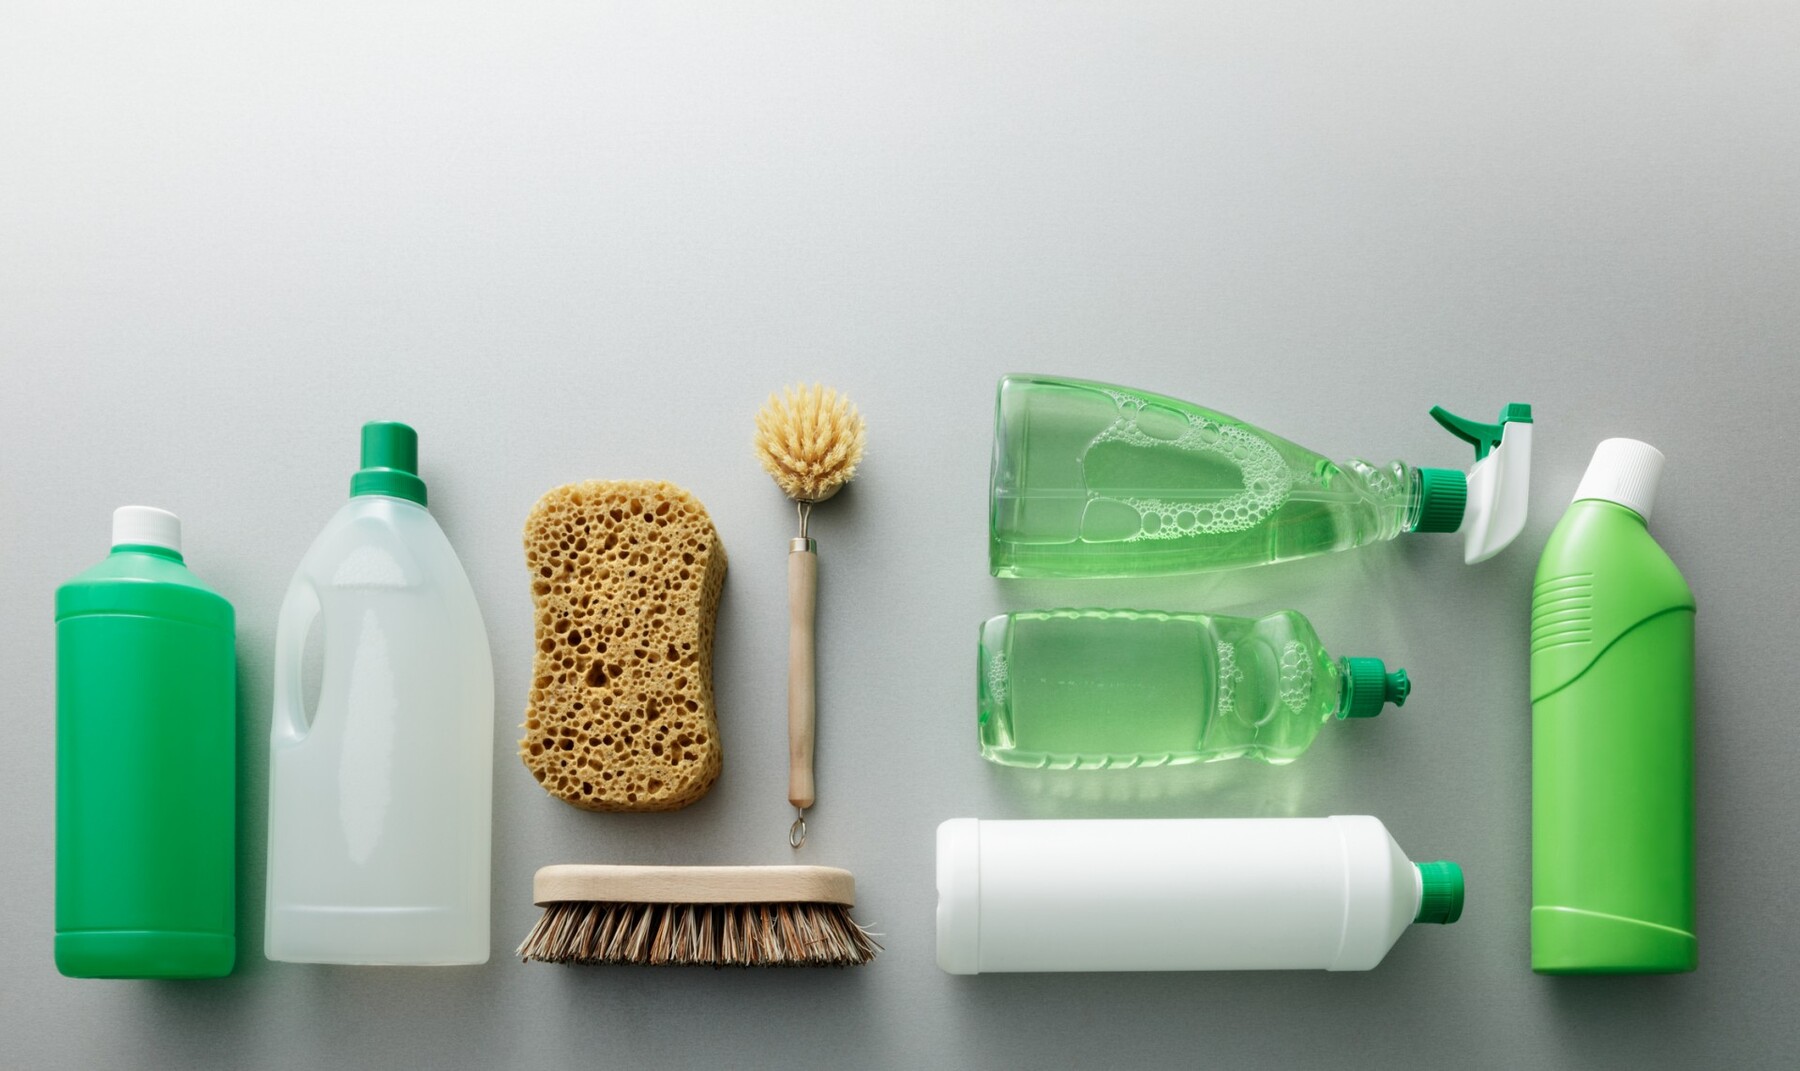 Office Cleaning Products, Eco Friendly, Environmentally Safe